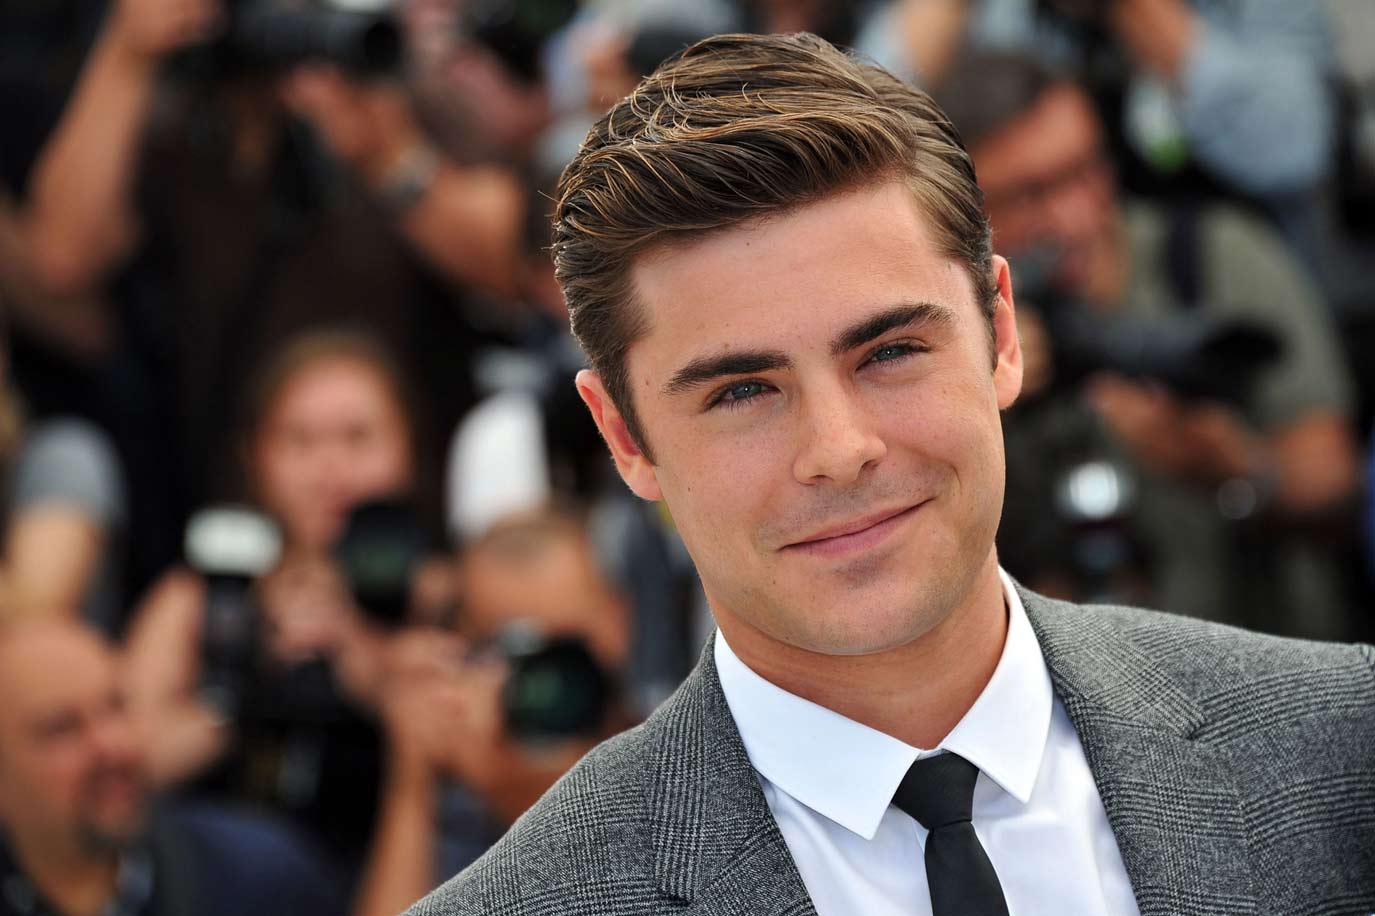 zac-efron-sexy-suit-hollywood-hot-sexiest-actor-men-movie-star-recent